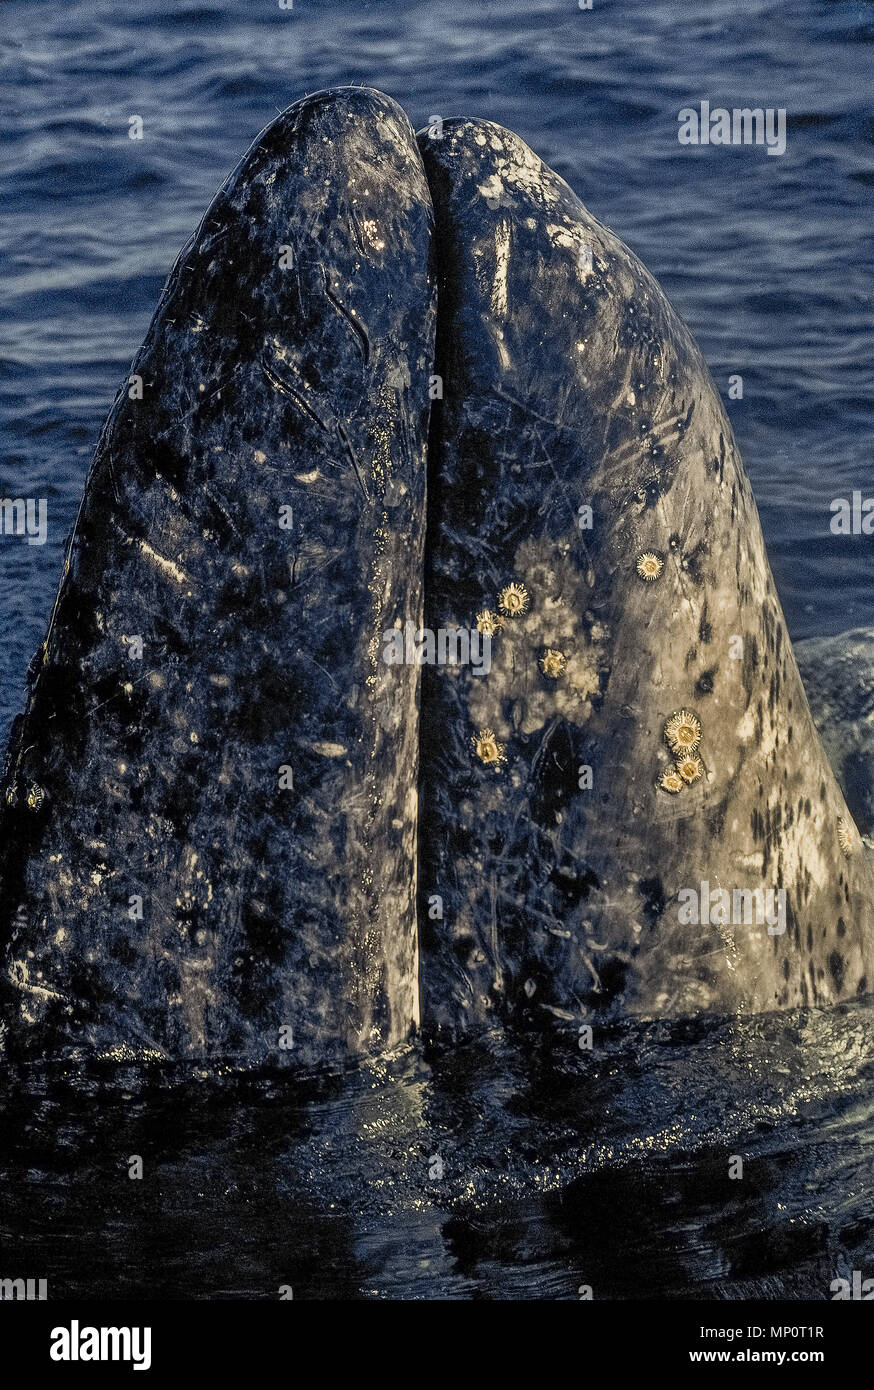 Round crusty barnacles and many scars mark the blubber on the rostrum (snout) of the Gray Whale (Eschrichtius robustus ), a phenominal marine mammal that has existed for more than 30,000 million years. Shown here in close-up is the mouth that appears first as the whale begins to poke its head vertically out of the water so it can see what is going on above the surface, a maneuver called spyhopping. This inquisitive aquatic animal was spyhopping in San Ignacio Lagoon off the western coast of Baja California Sur in Mexico, North America. Stock Photo